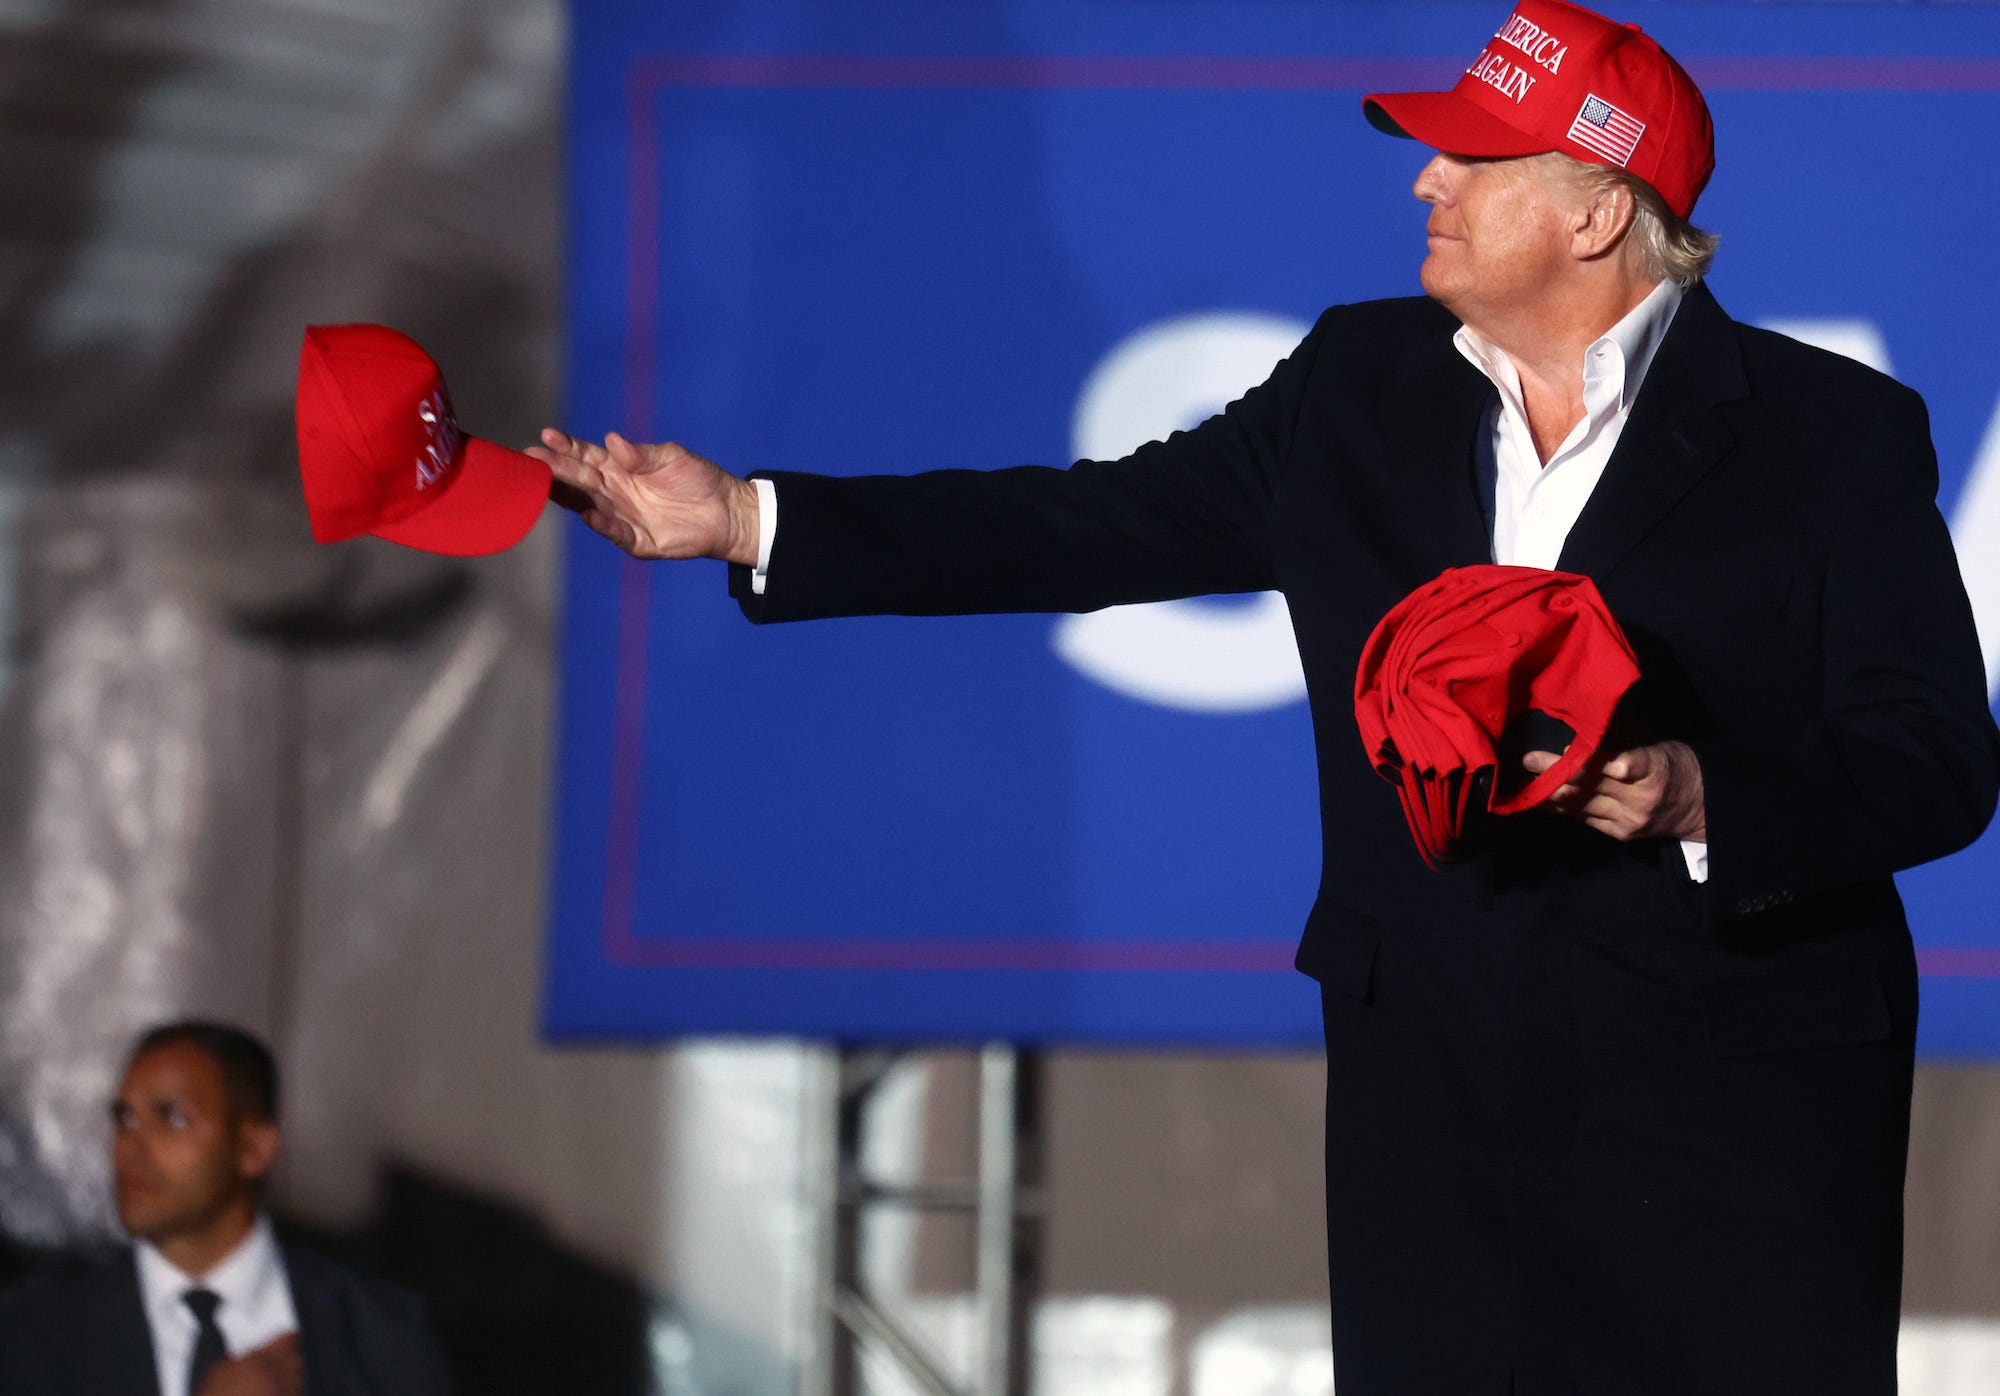 Former President Donald Trump tosses a MAGA hat into the crowd at a rally in Arizona.